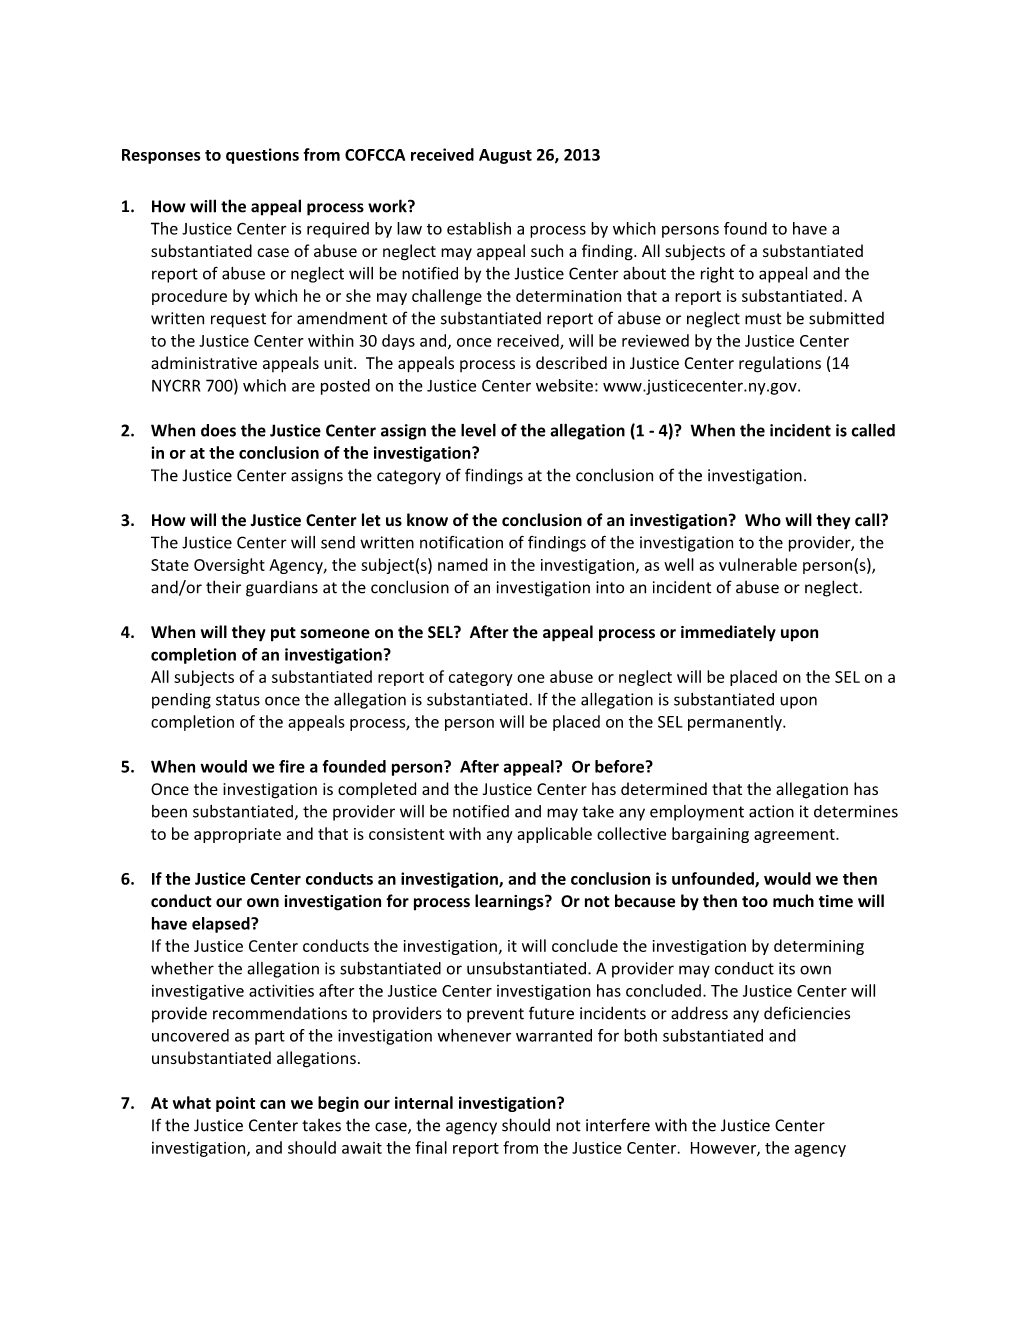 Responses to Questions from COFCCA Received August 26, 2013